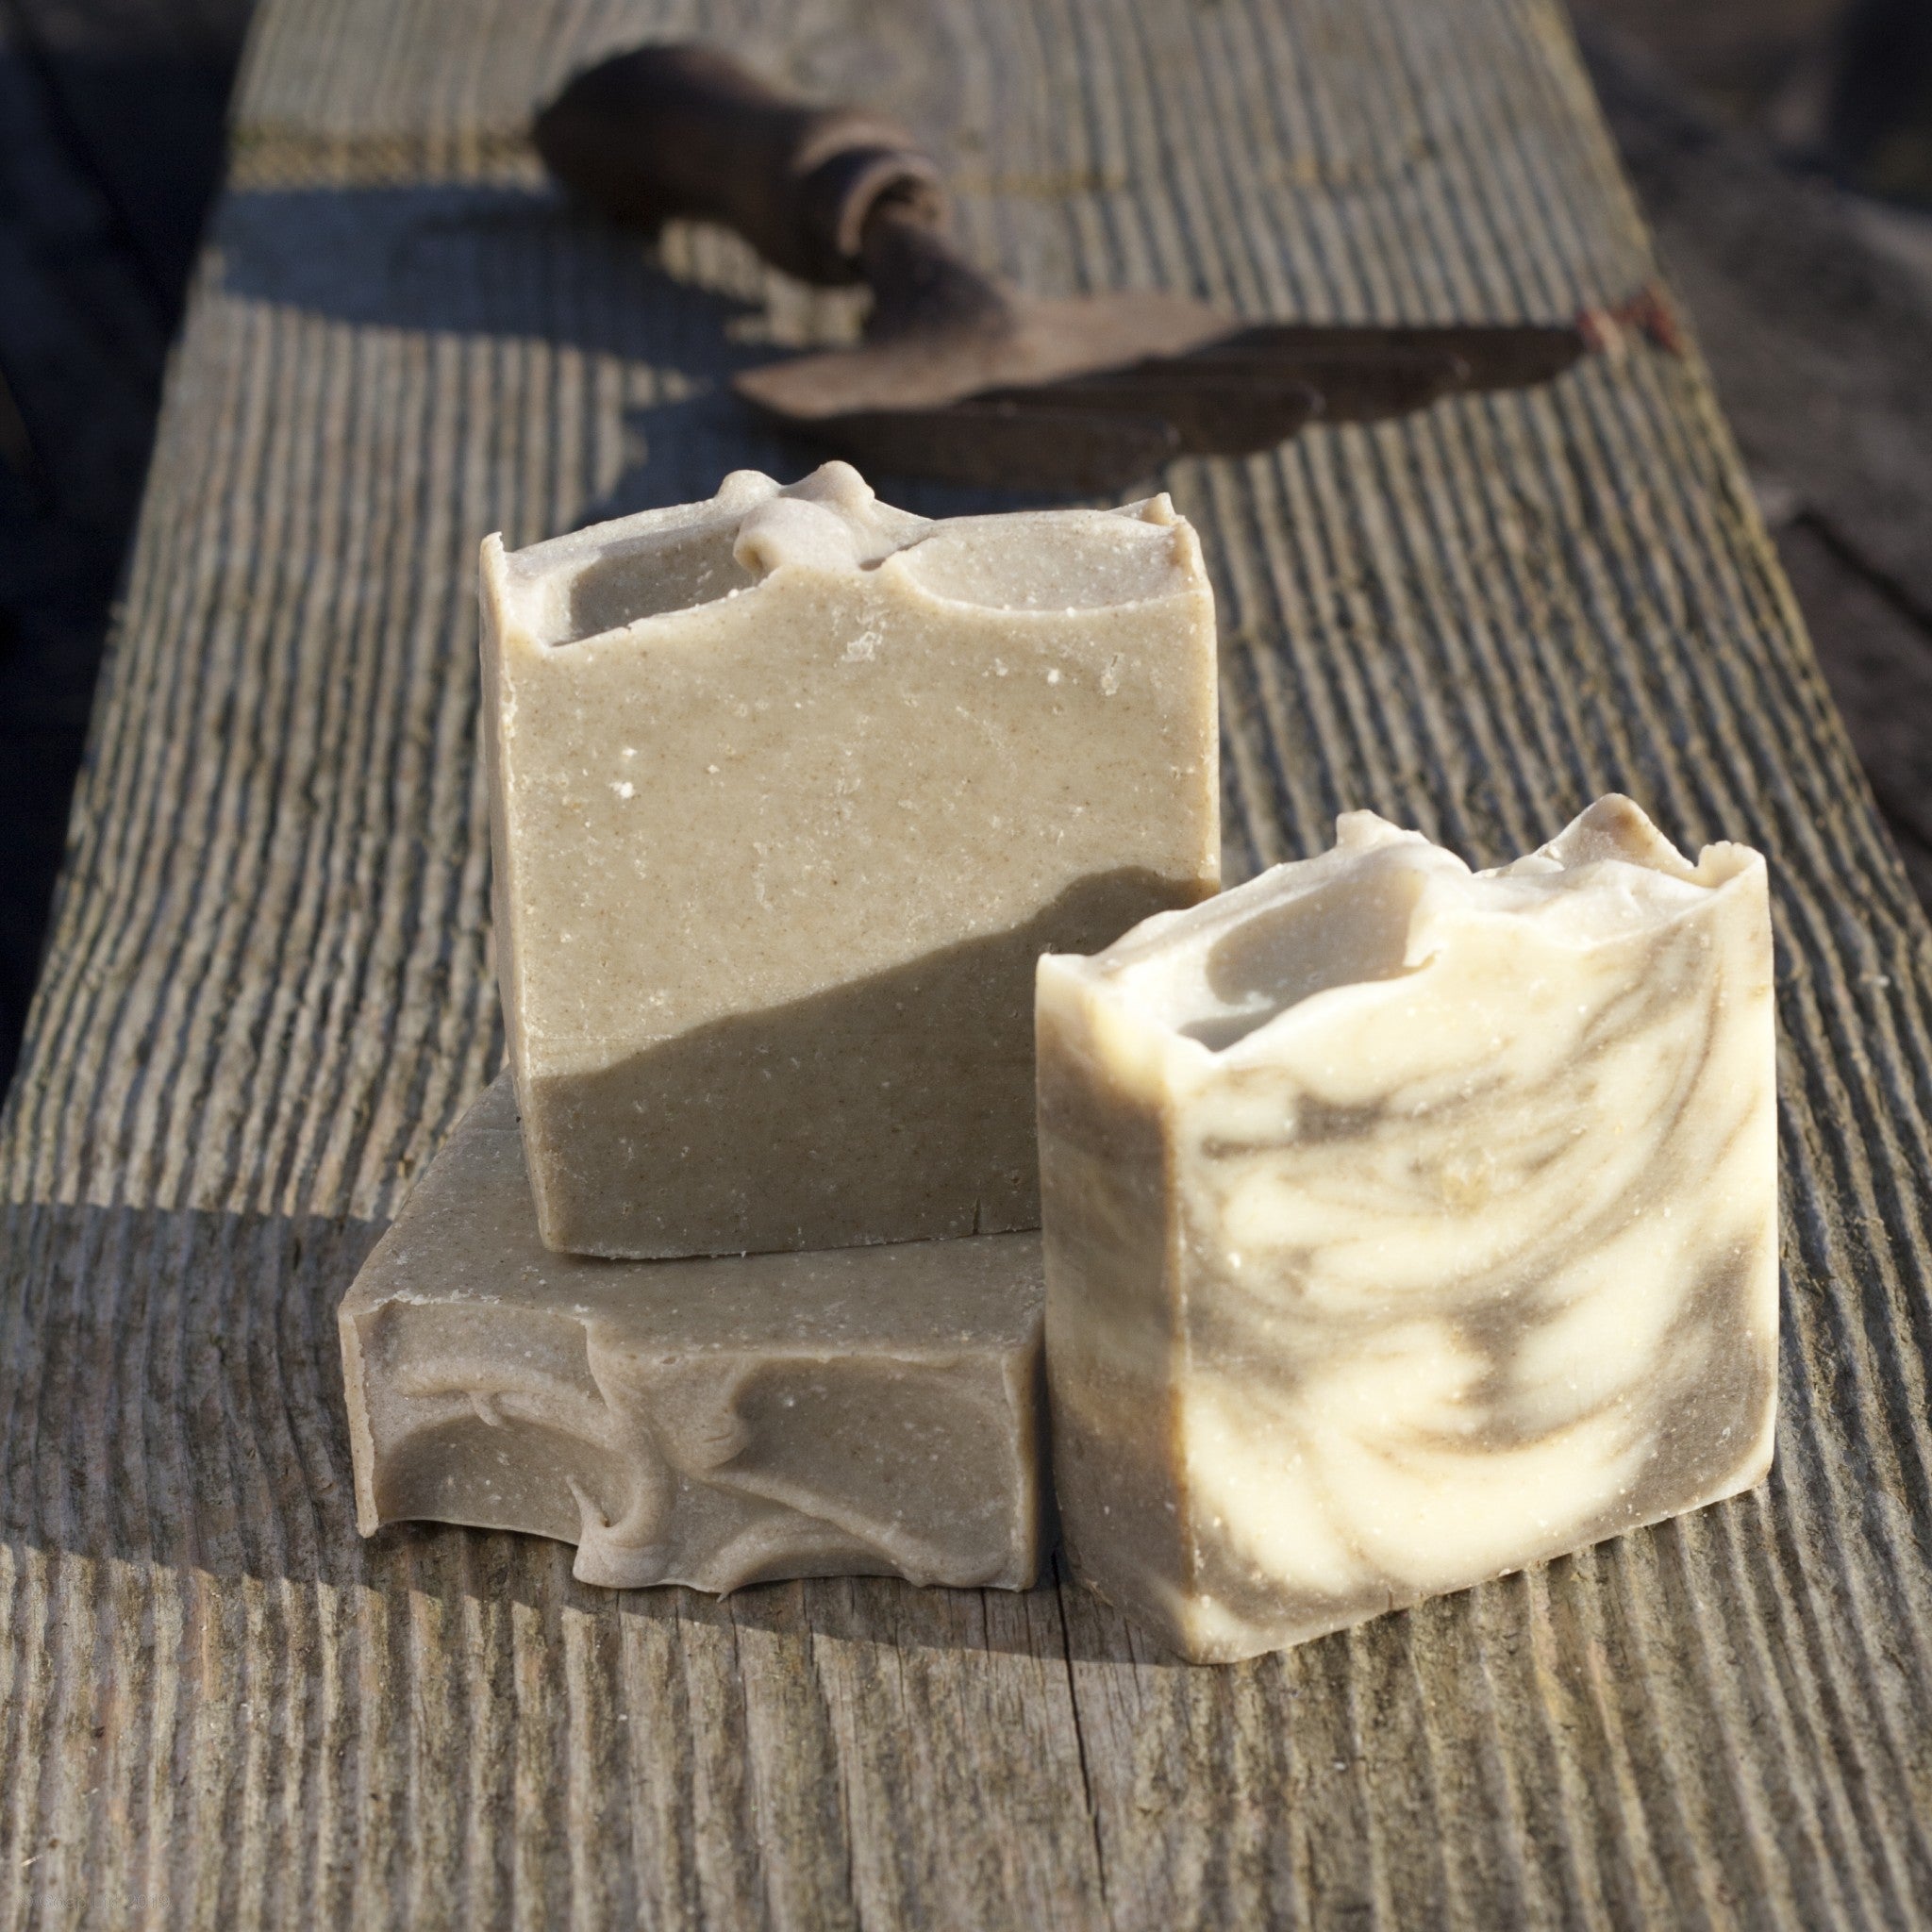 Nitty Gritty soap gardeners bar from Goap